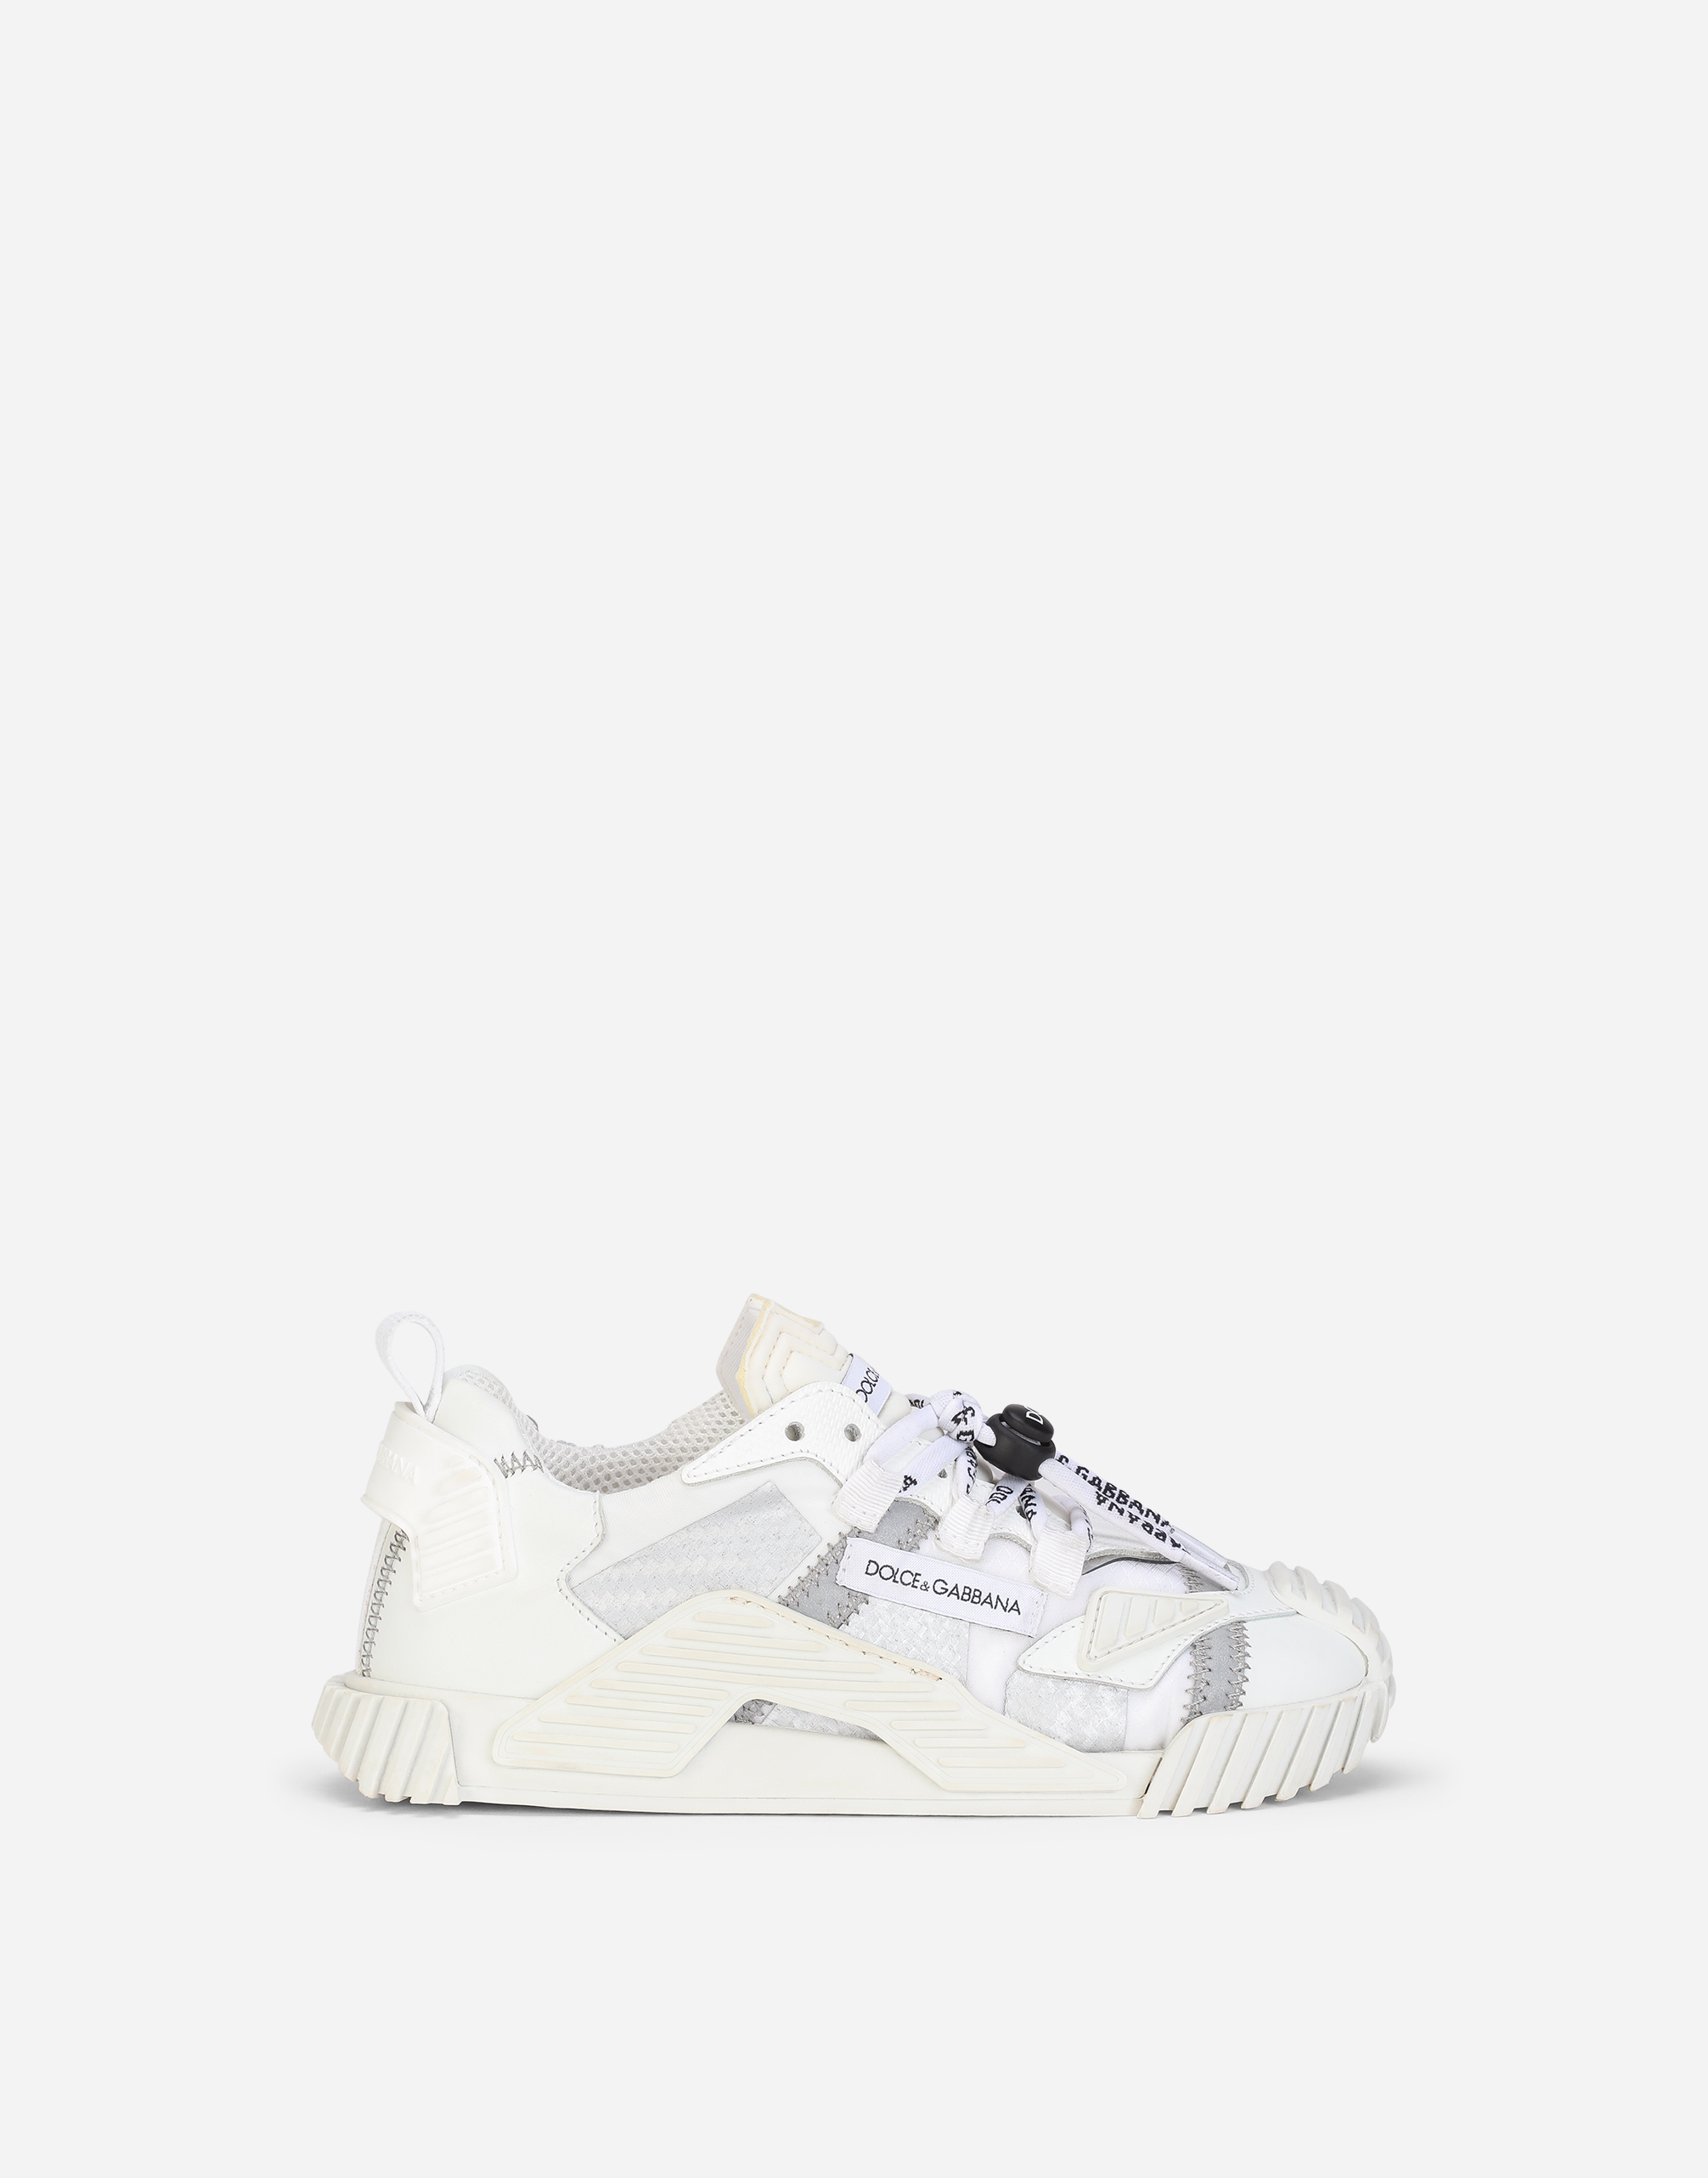 Reflective fabric NS1 sneakers in White